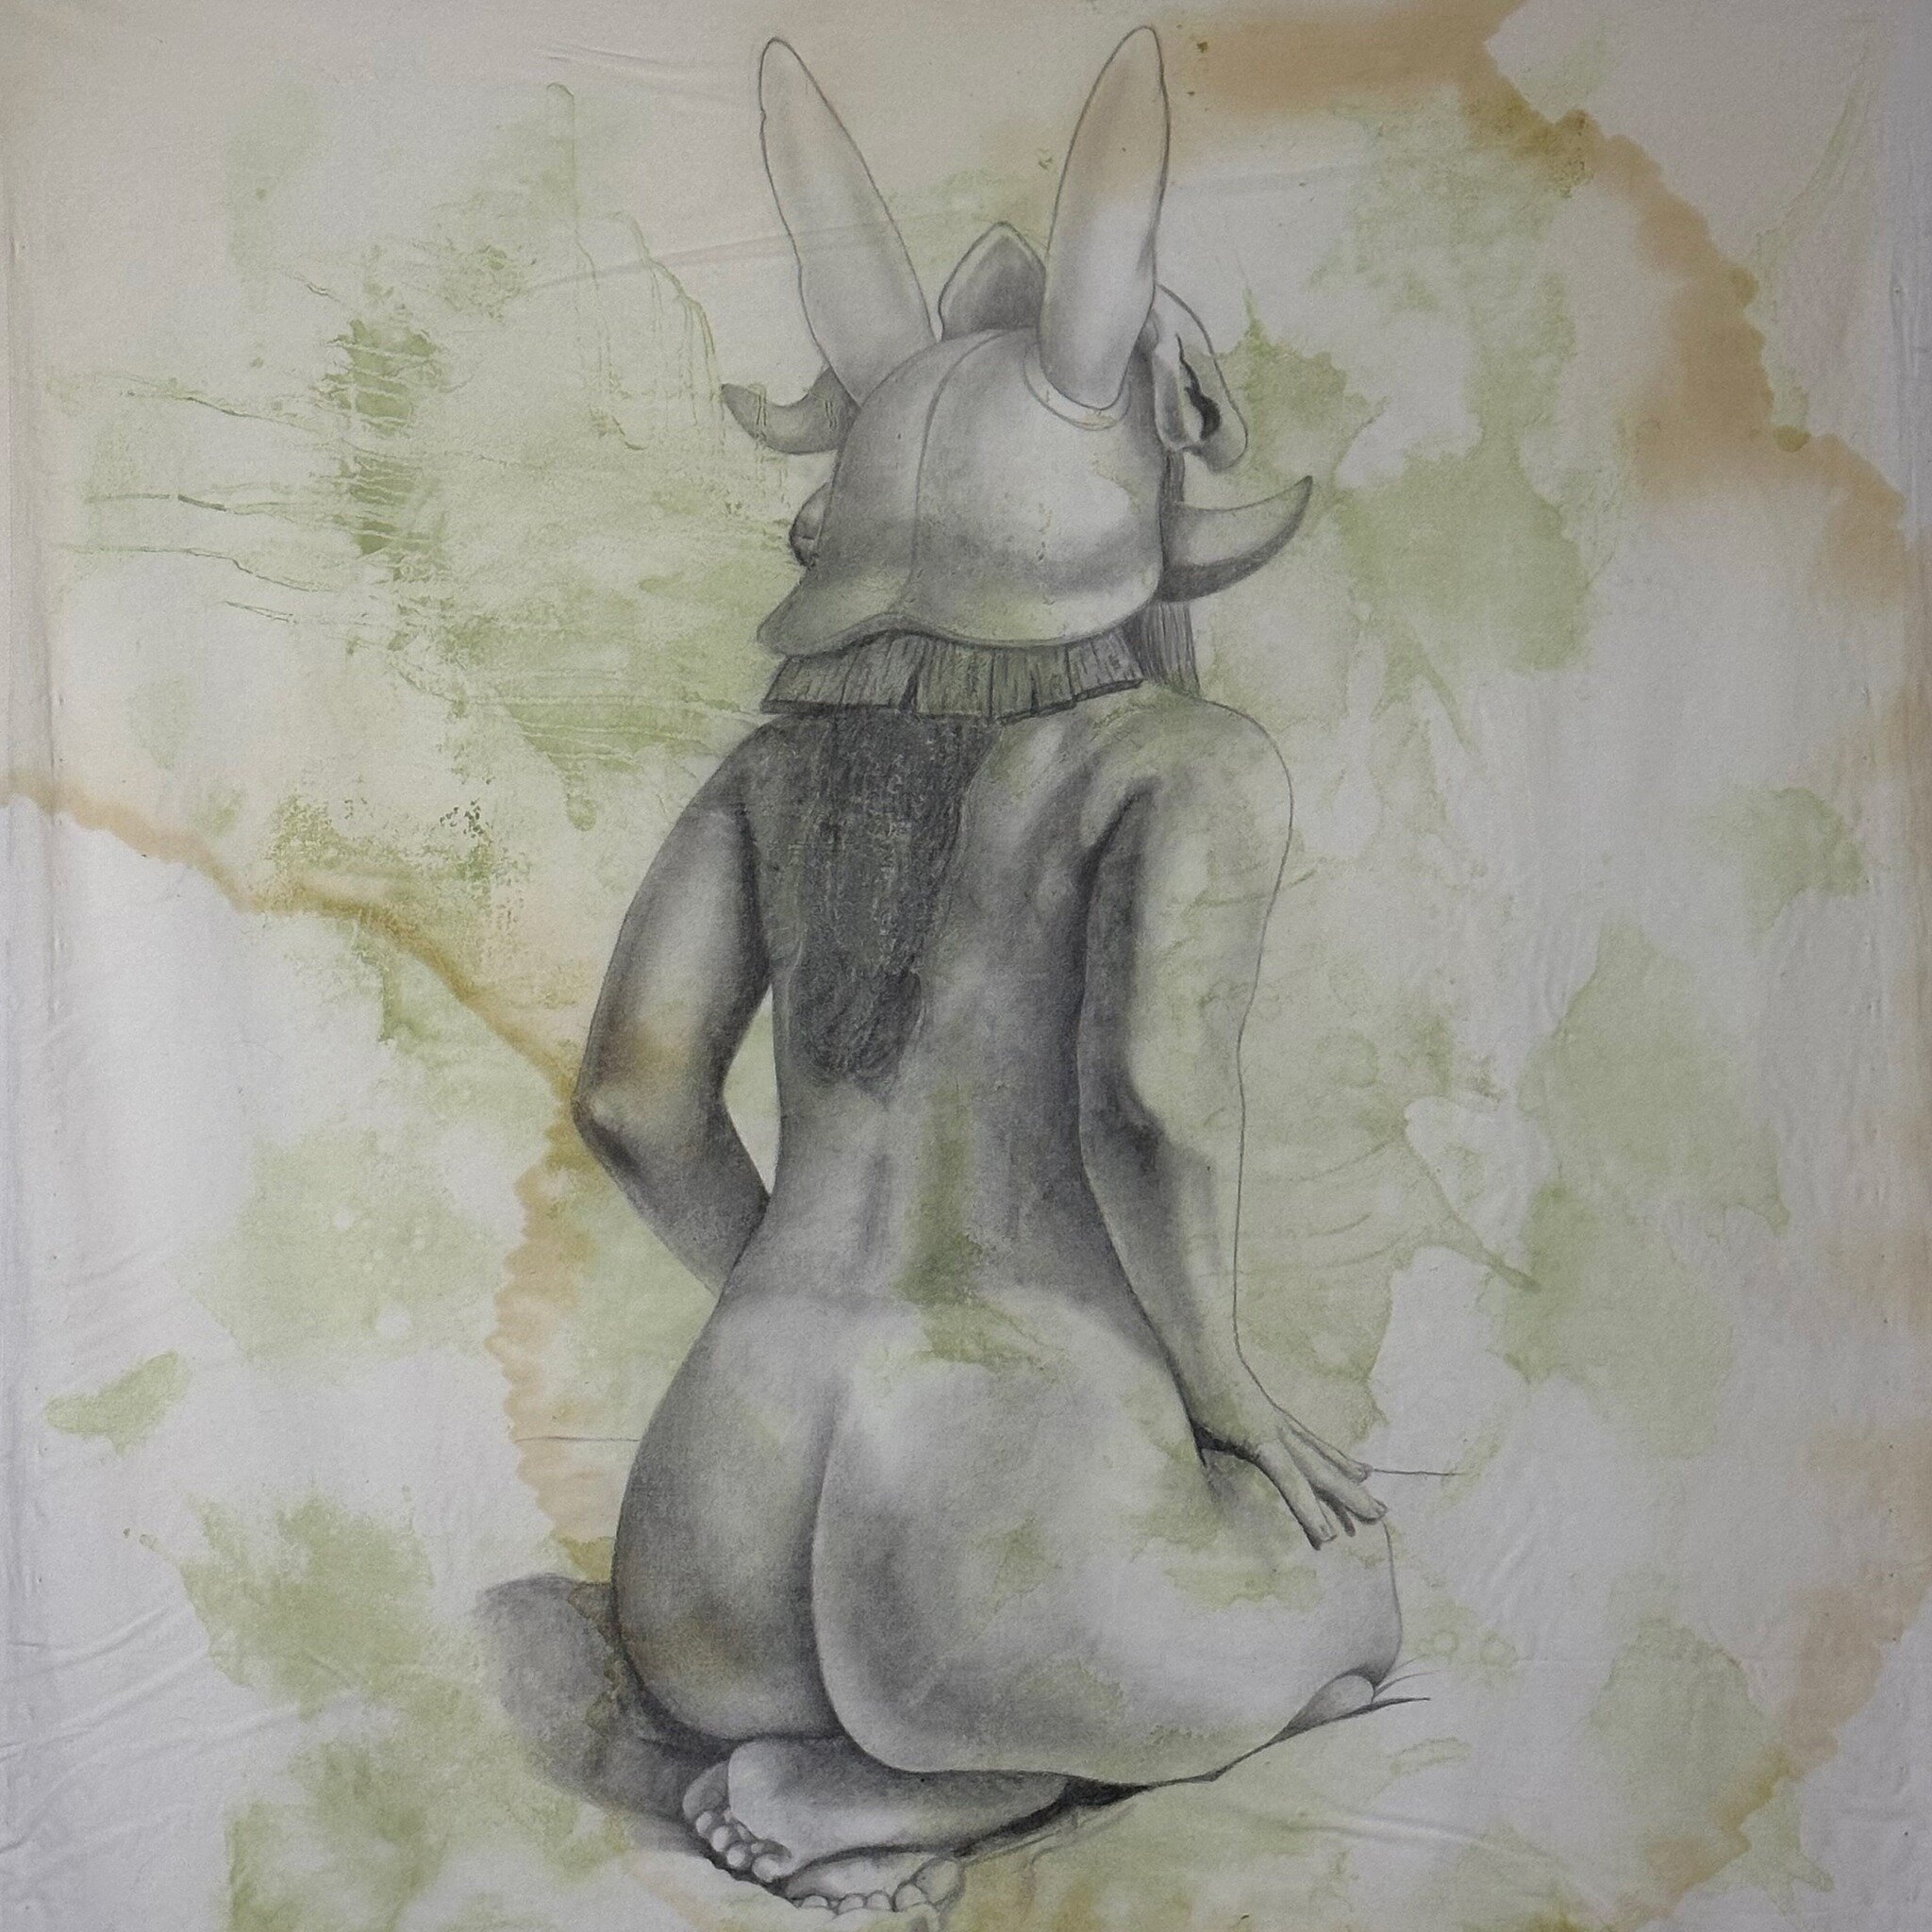 @ivan_romano_v 
'Untitled', 2023
Mixed media
150x125 cm

Support:

Half a single cotton sheet for each individual artwork.

Organic Materials:

Dried and then rehydrated wasabi, used for the artwork depicting a girl with her back turned. This piece w